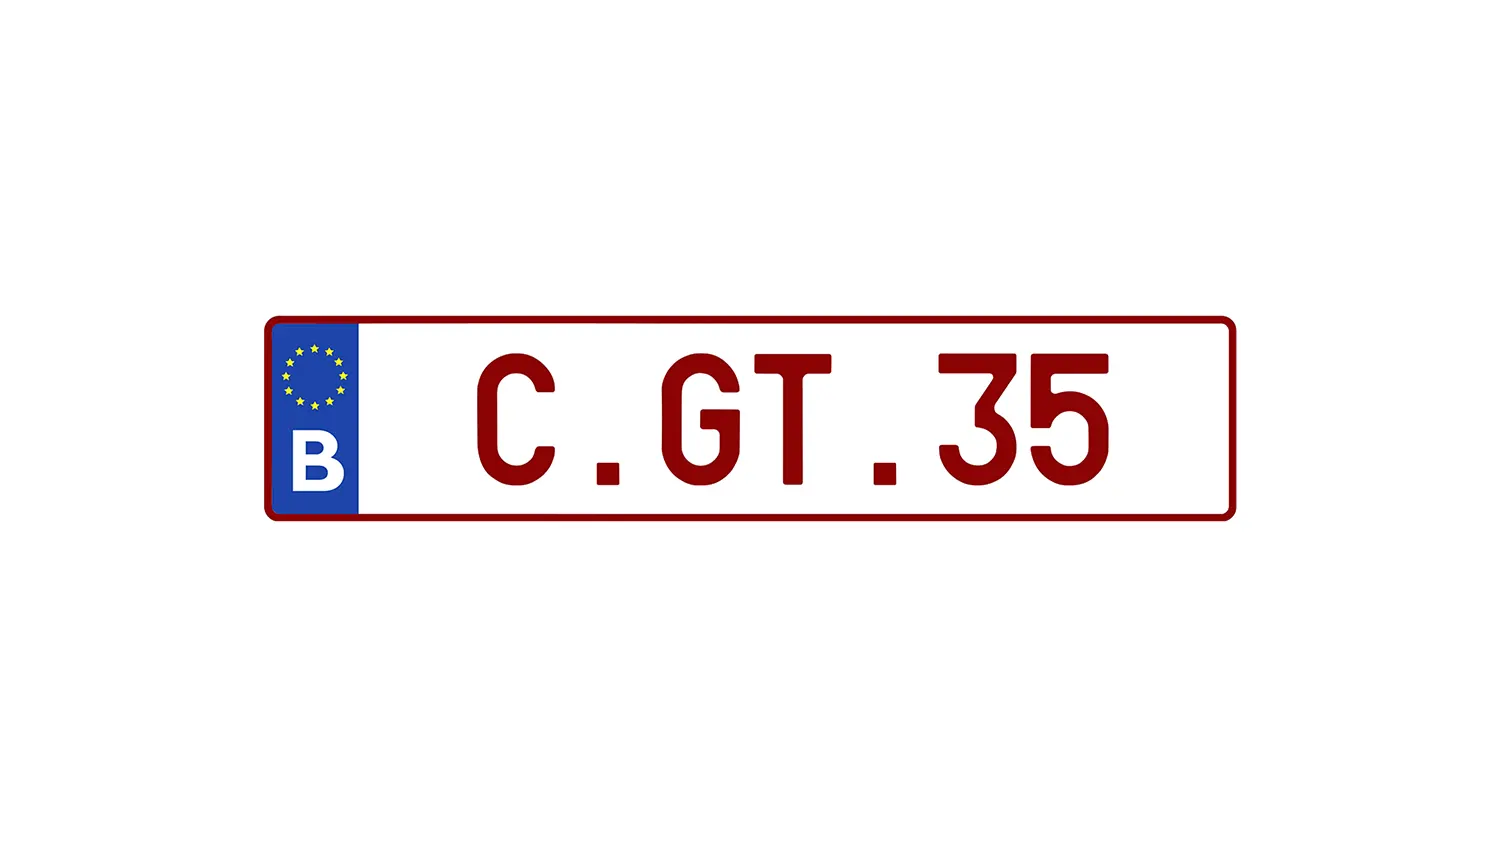 example of old approved plate